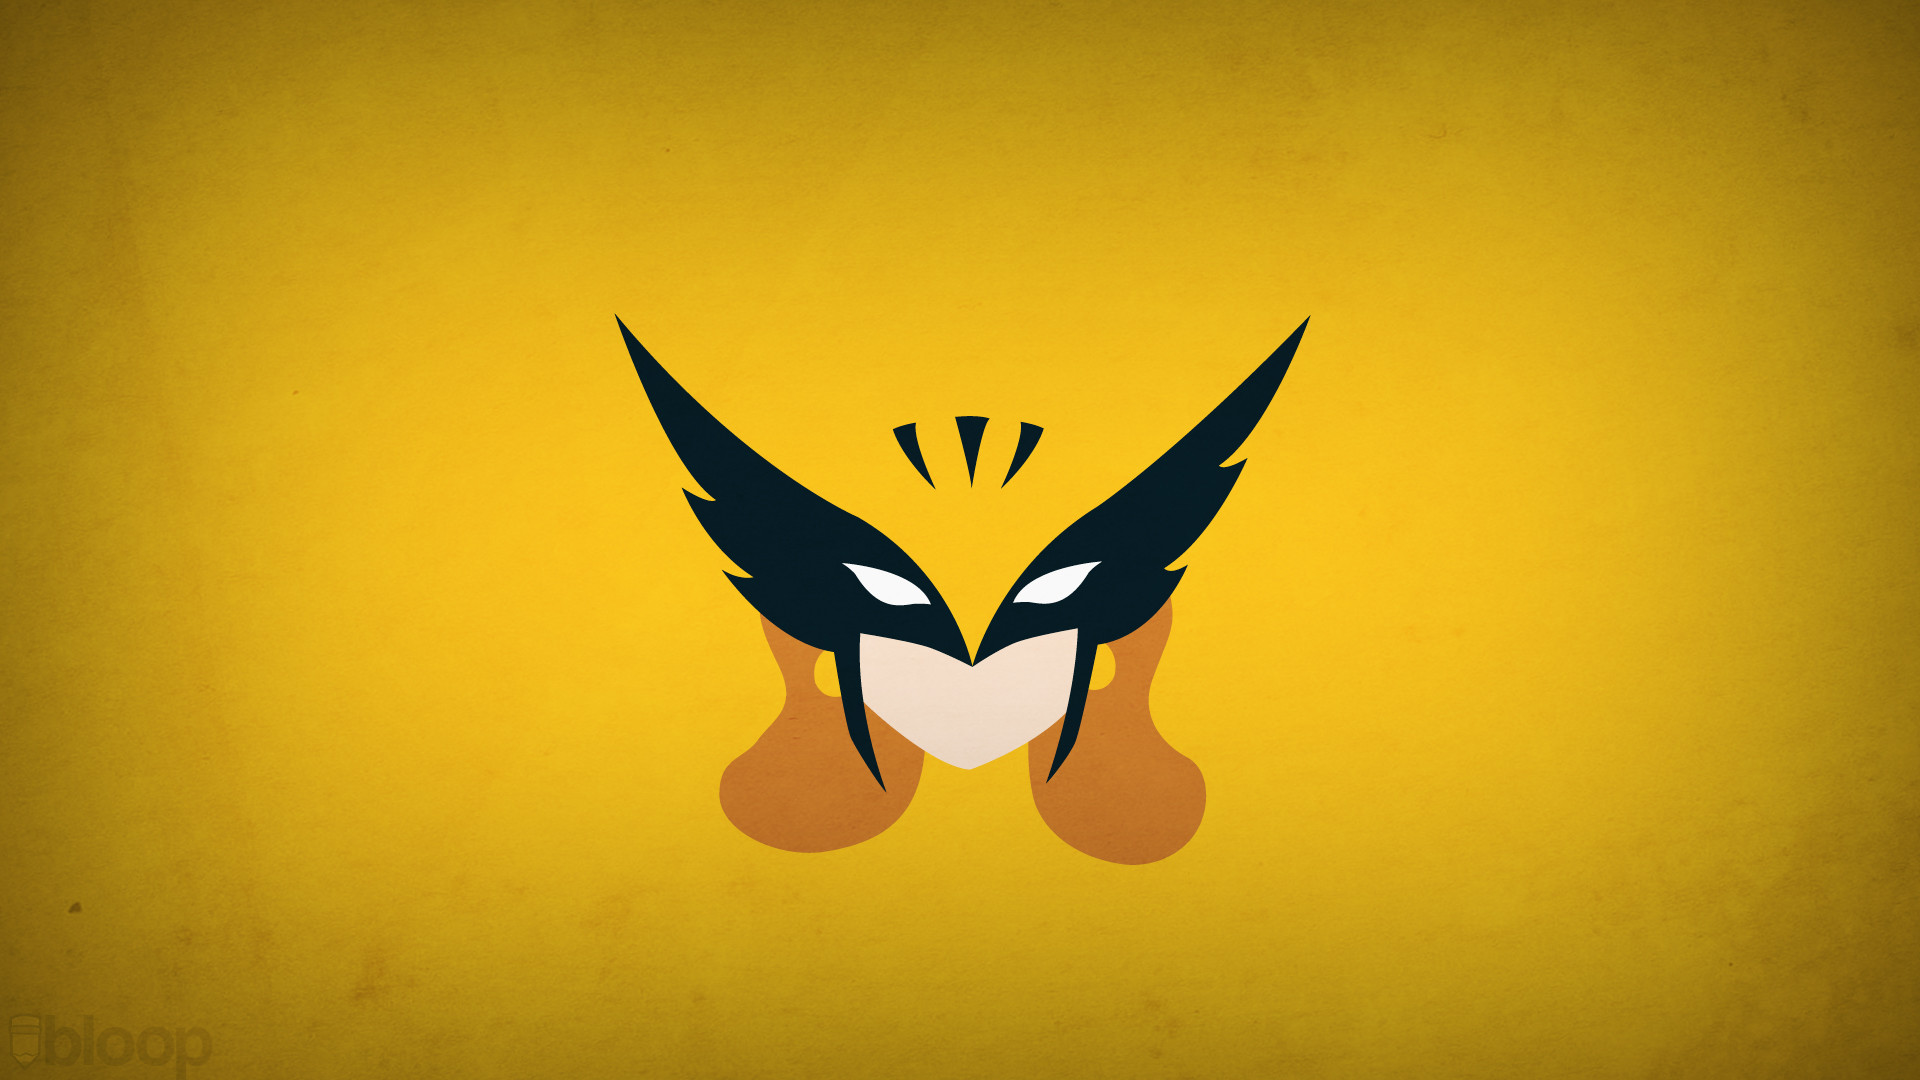 1920x1080 Hawkman Minimalistic Superheroes Yellow Background free iPhone or Android  Full HD wallpaper.